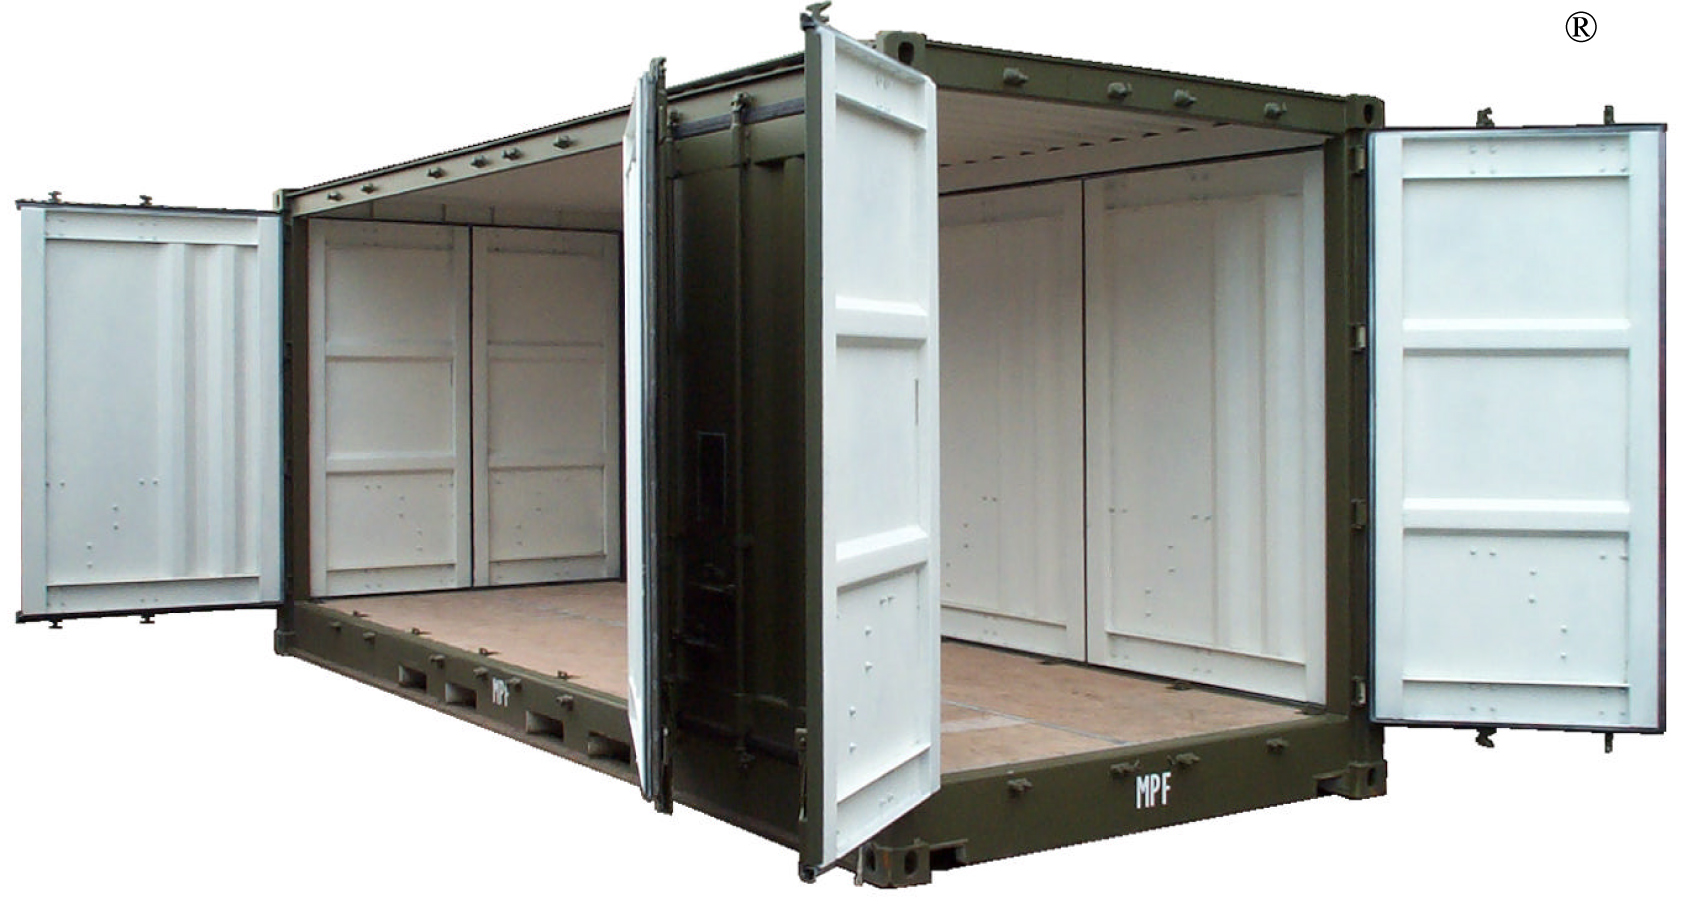 20’ x 8’ Dry Freight ISO Container - All Access